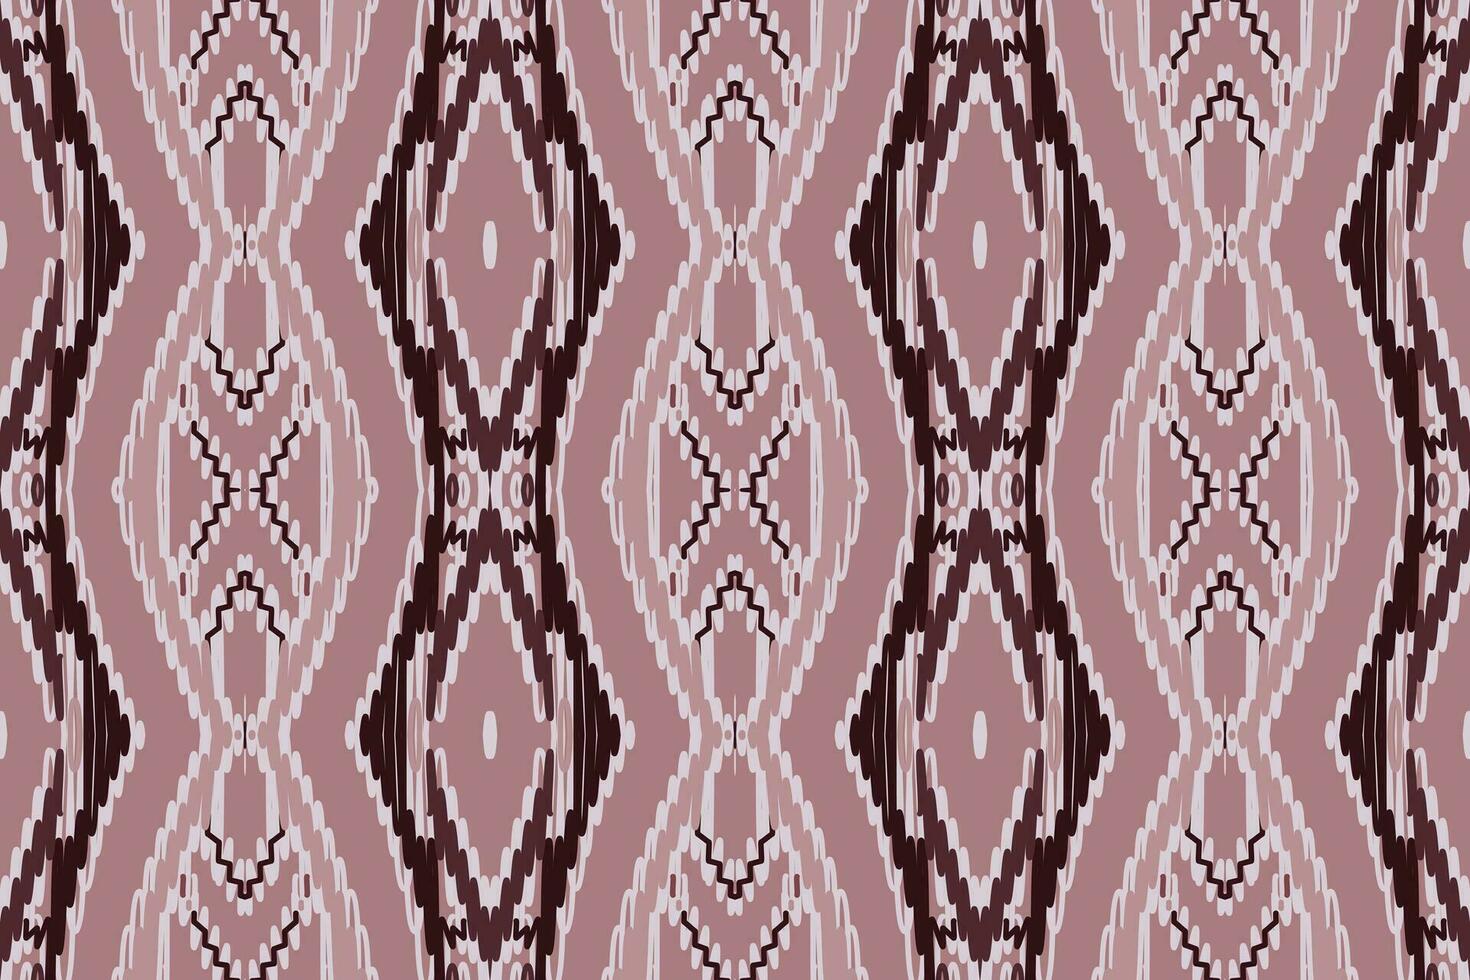 Tie dye Pattern Seamless Mughal architecture Motif embroidery, Ikat embroidery vector Design for Print figure tribal ink on cloth patola sari